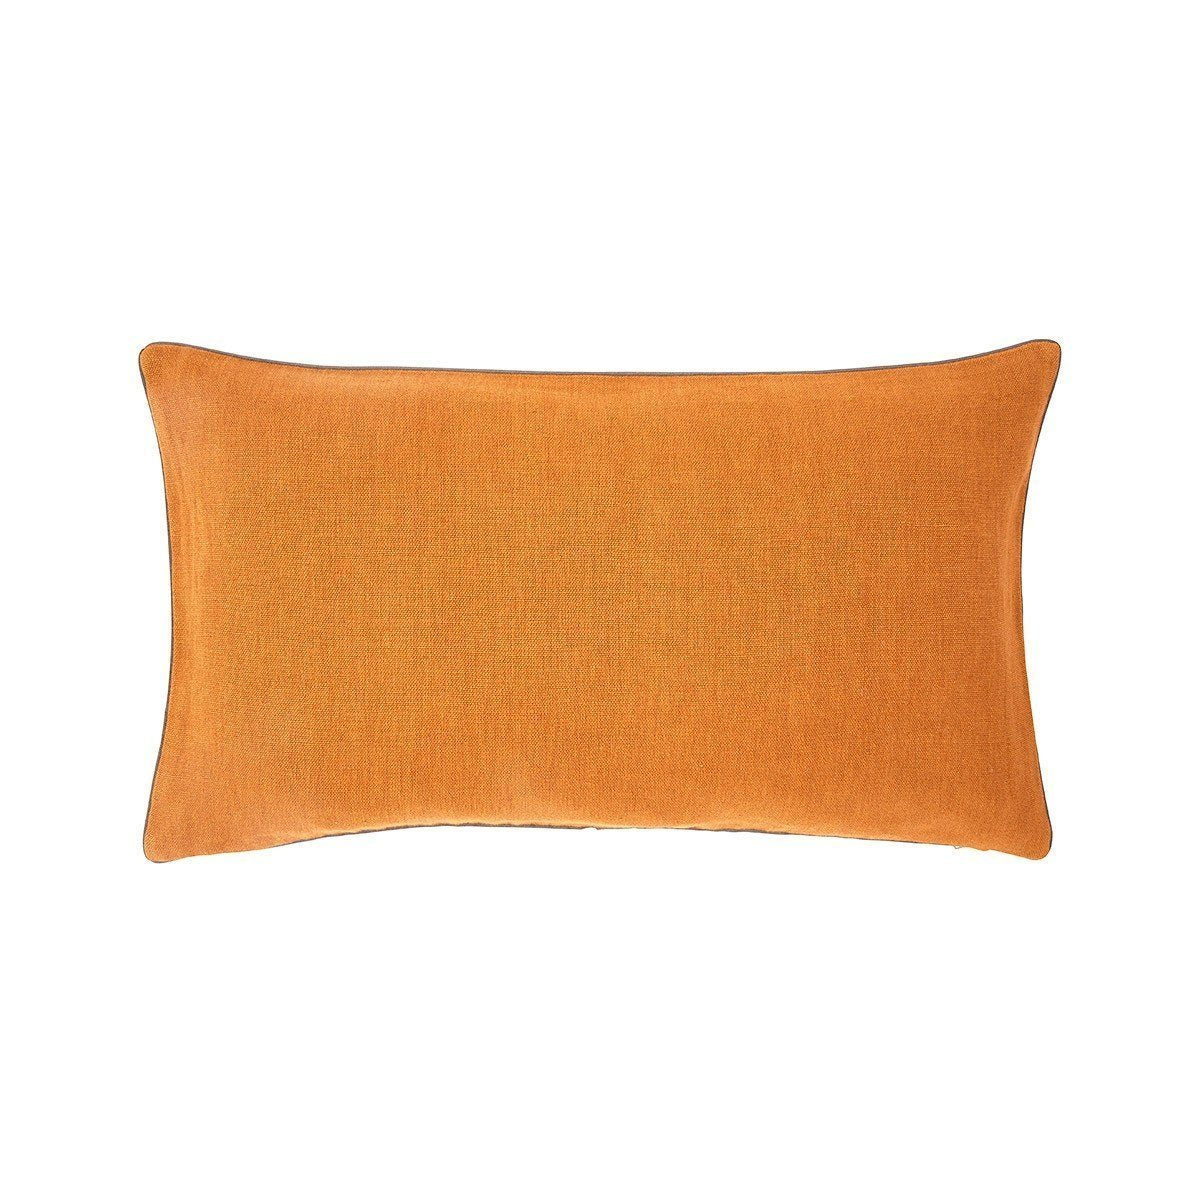 Pigment Cuir Pillow by Iosis